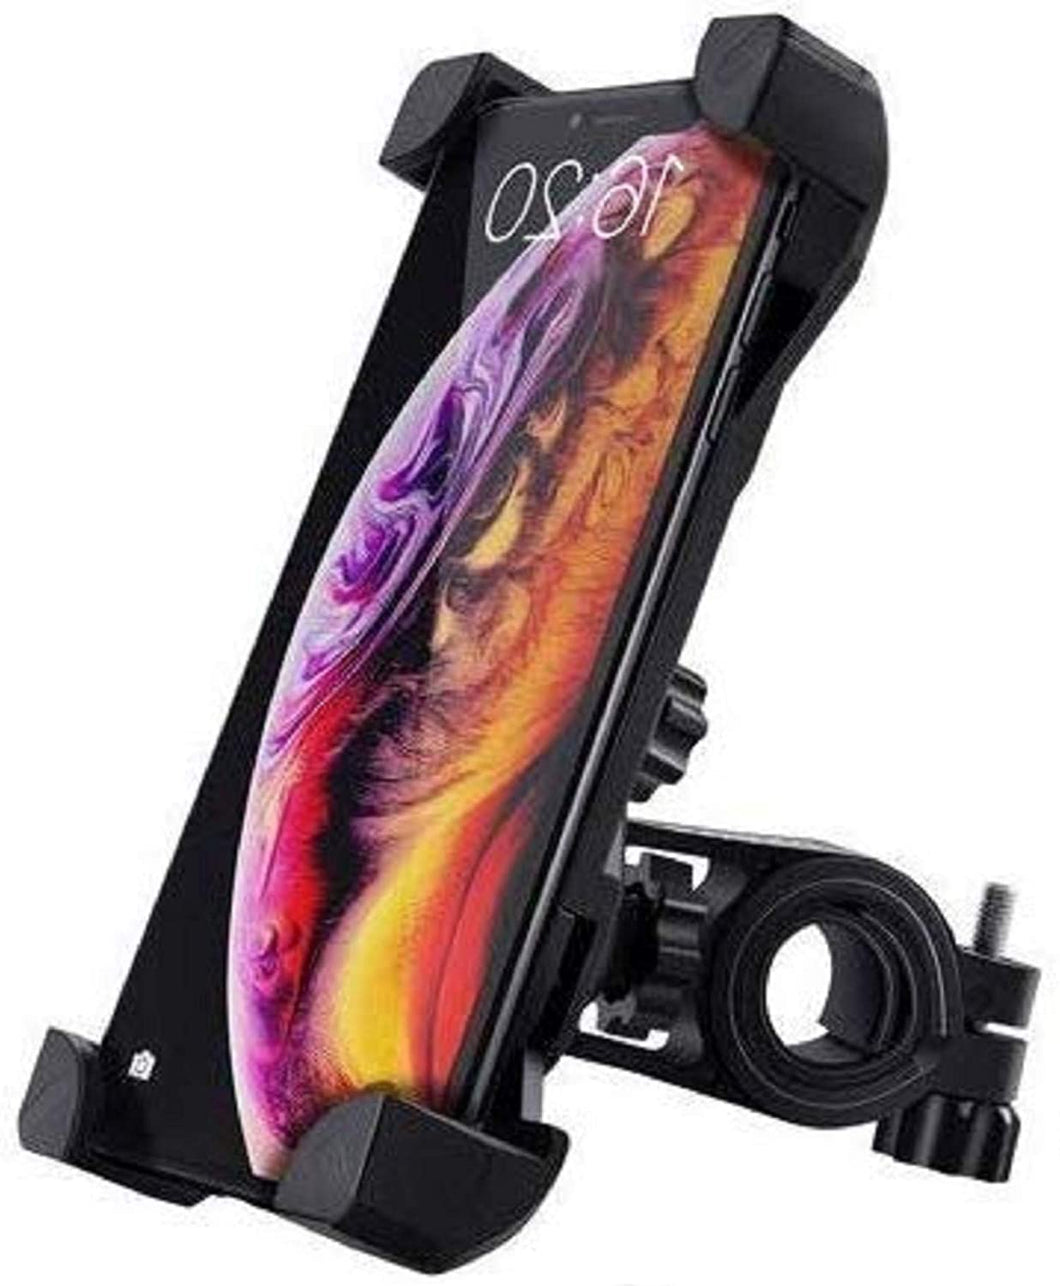 Universal Bike Motorcycle Cell Phone Holder Mount Stand Bracket Fits for All Mobile Phones Size Upto 5.5